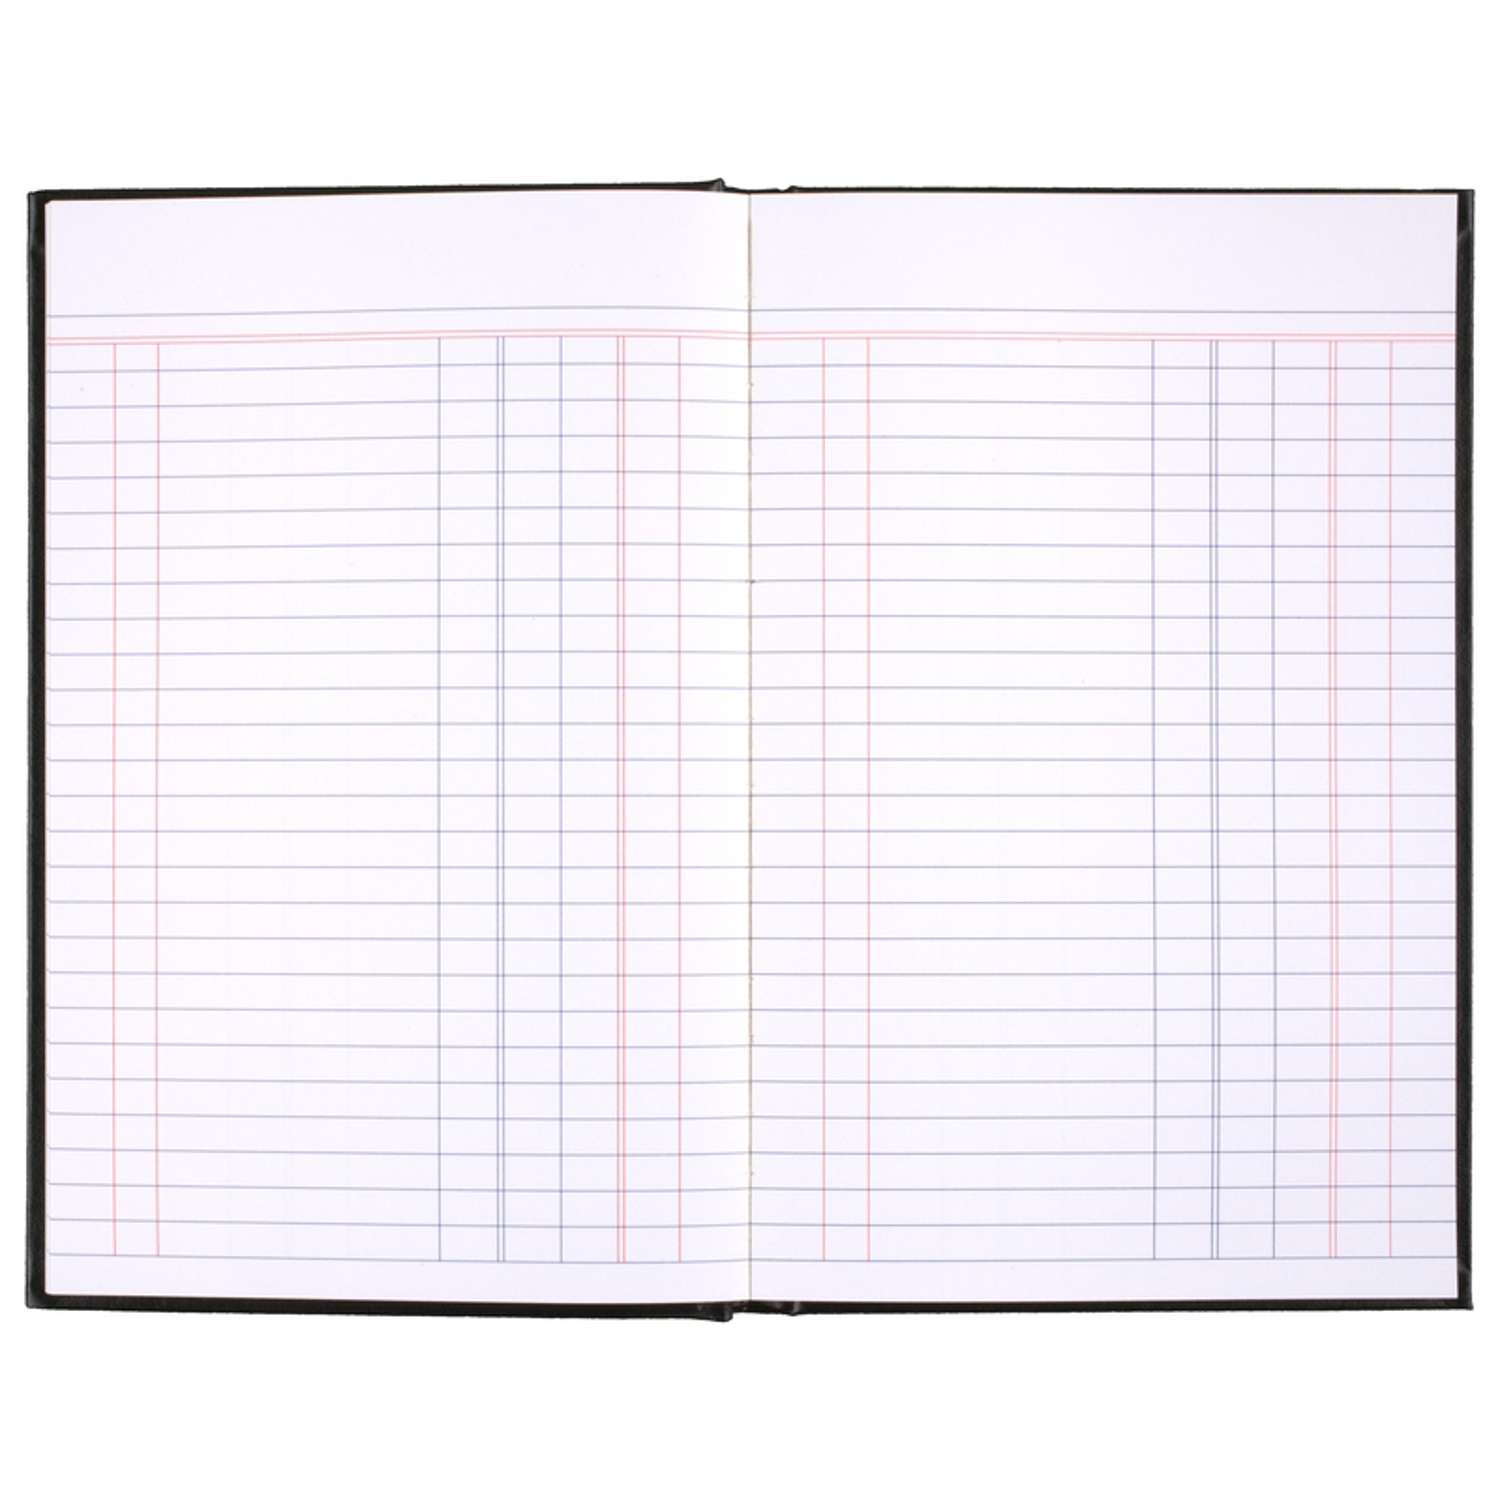 Blue Summit Supplies Receipt Books with 3-Part Carbonless Forms, 5 Pac